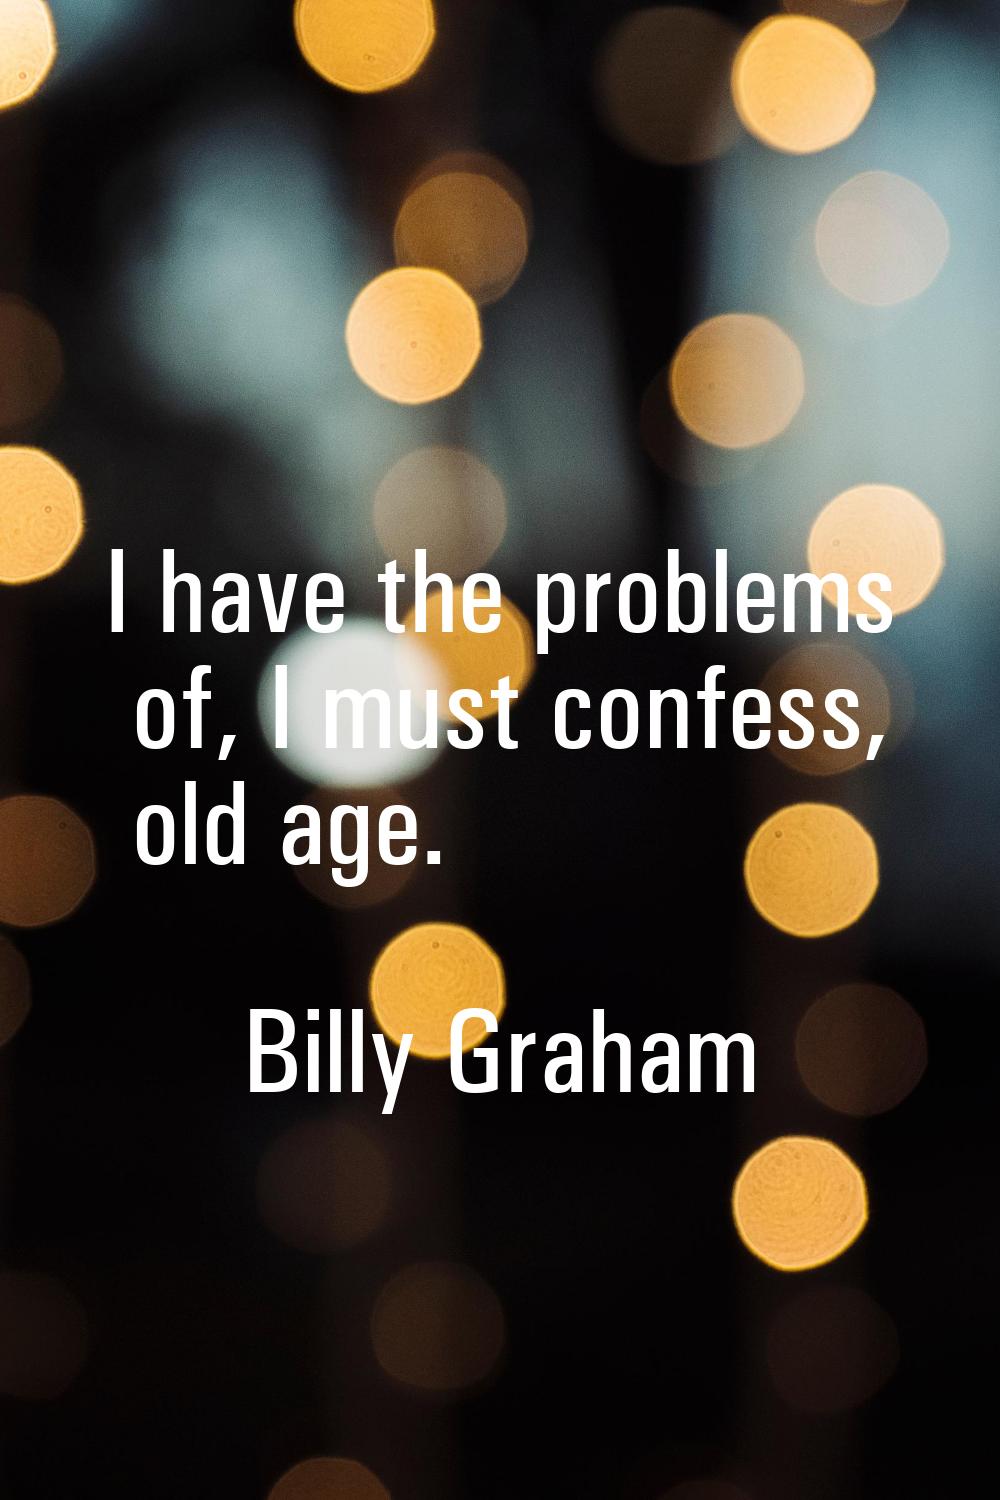 I have the problems of, I must confess, old age.